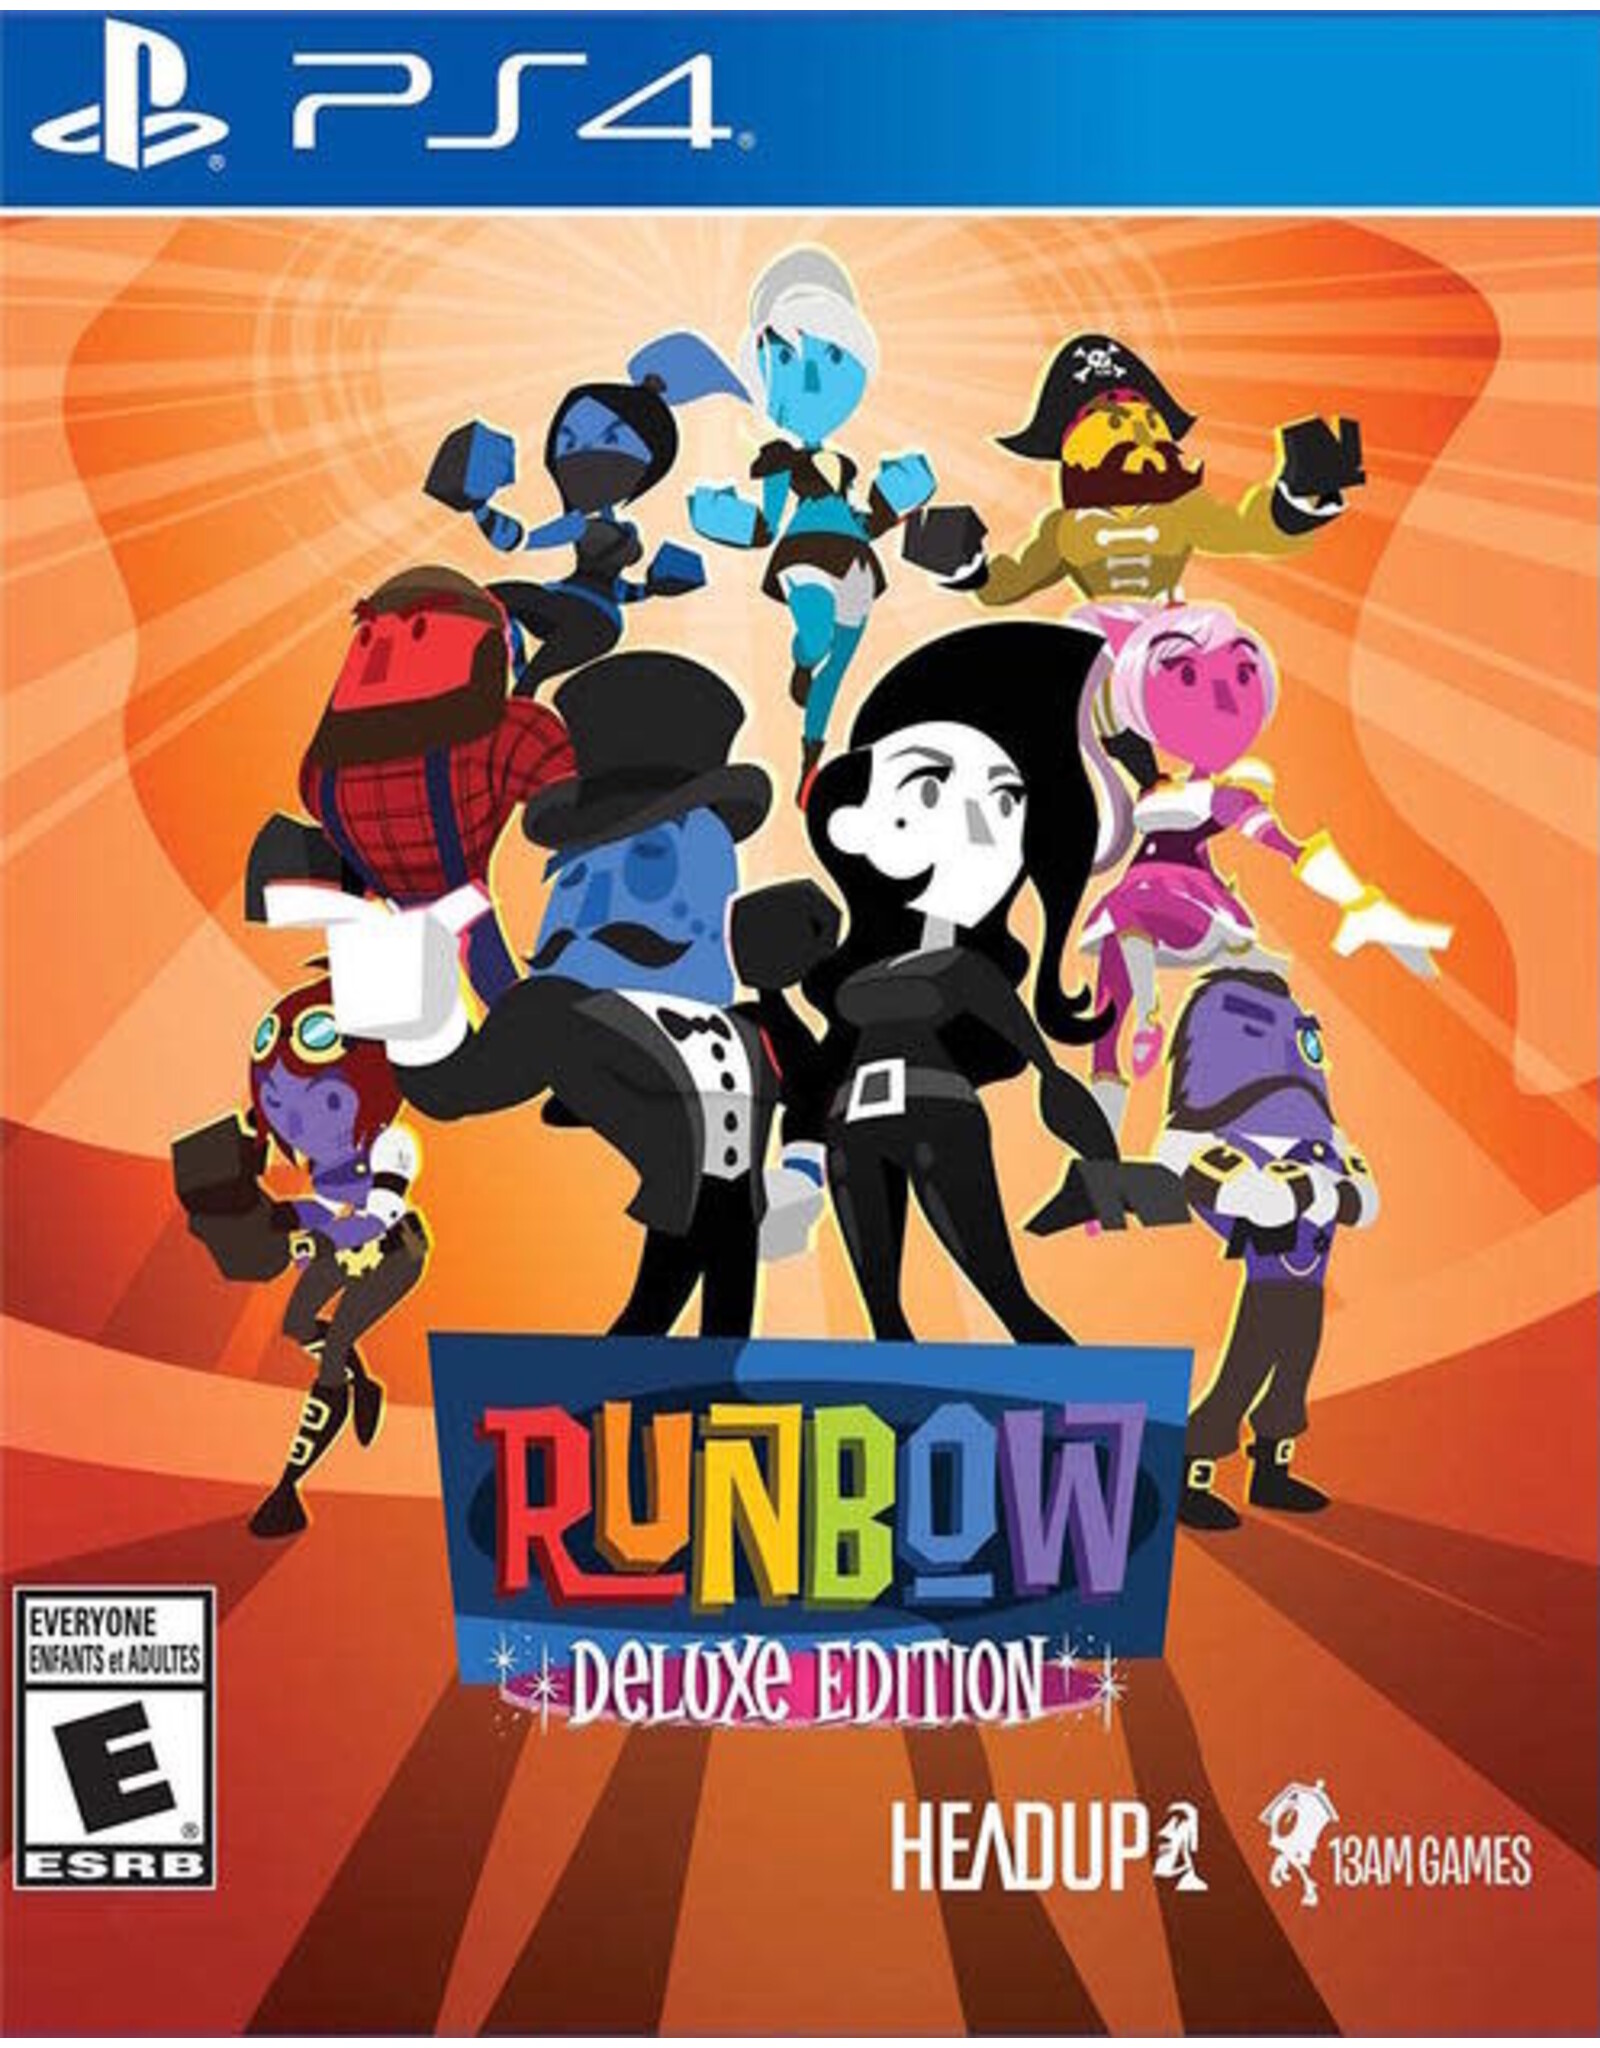 Playstation 4 Runbow Deluxe Edition (CiB)